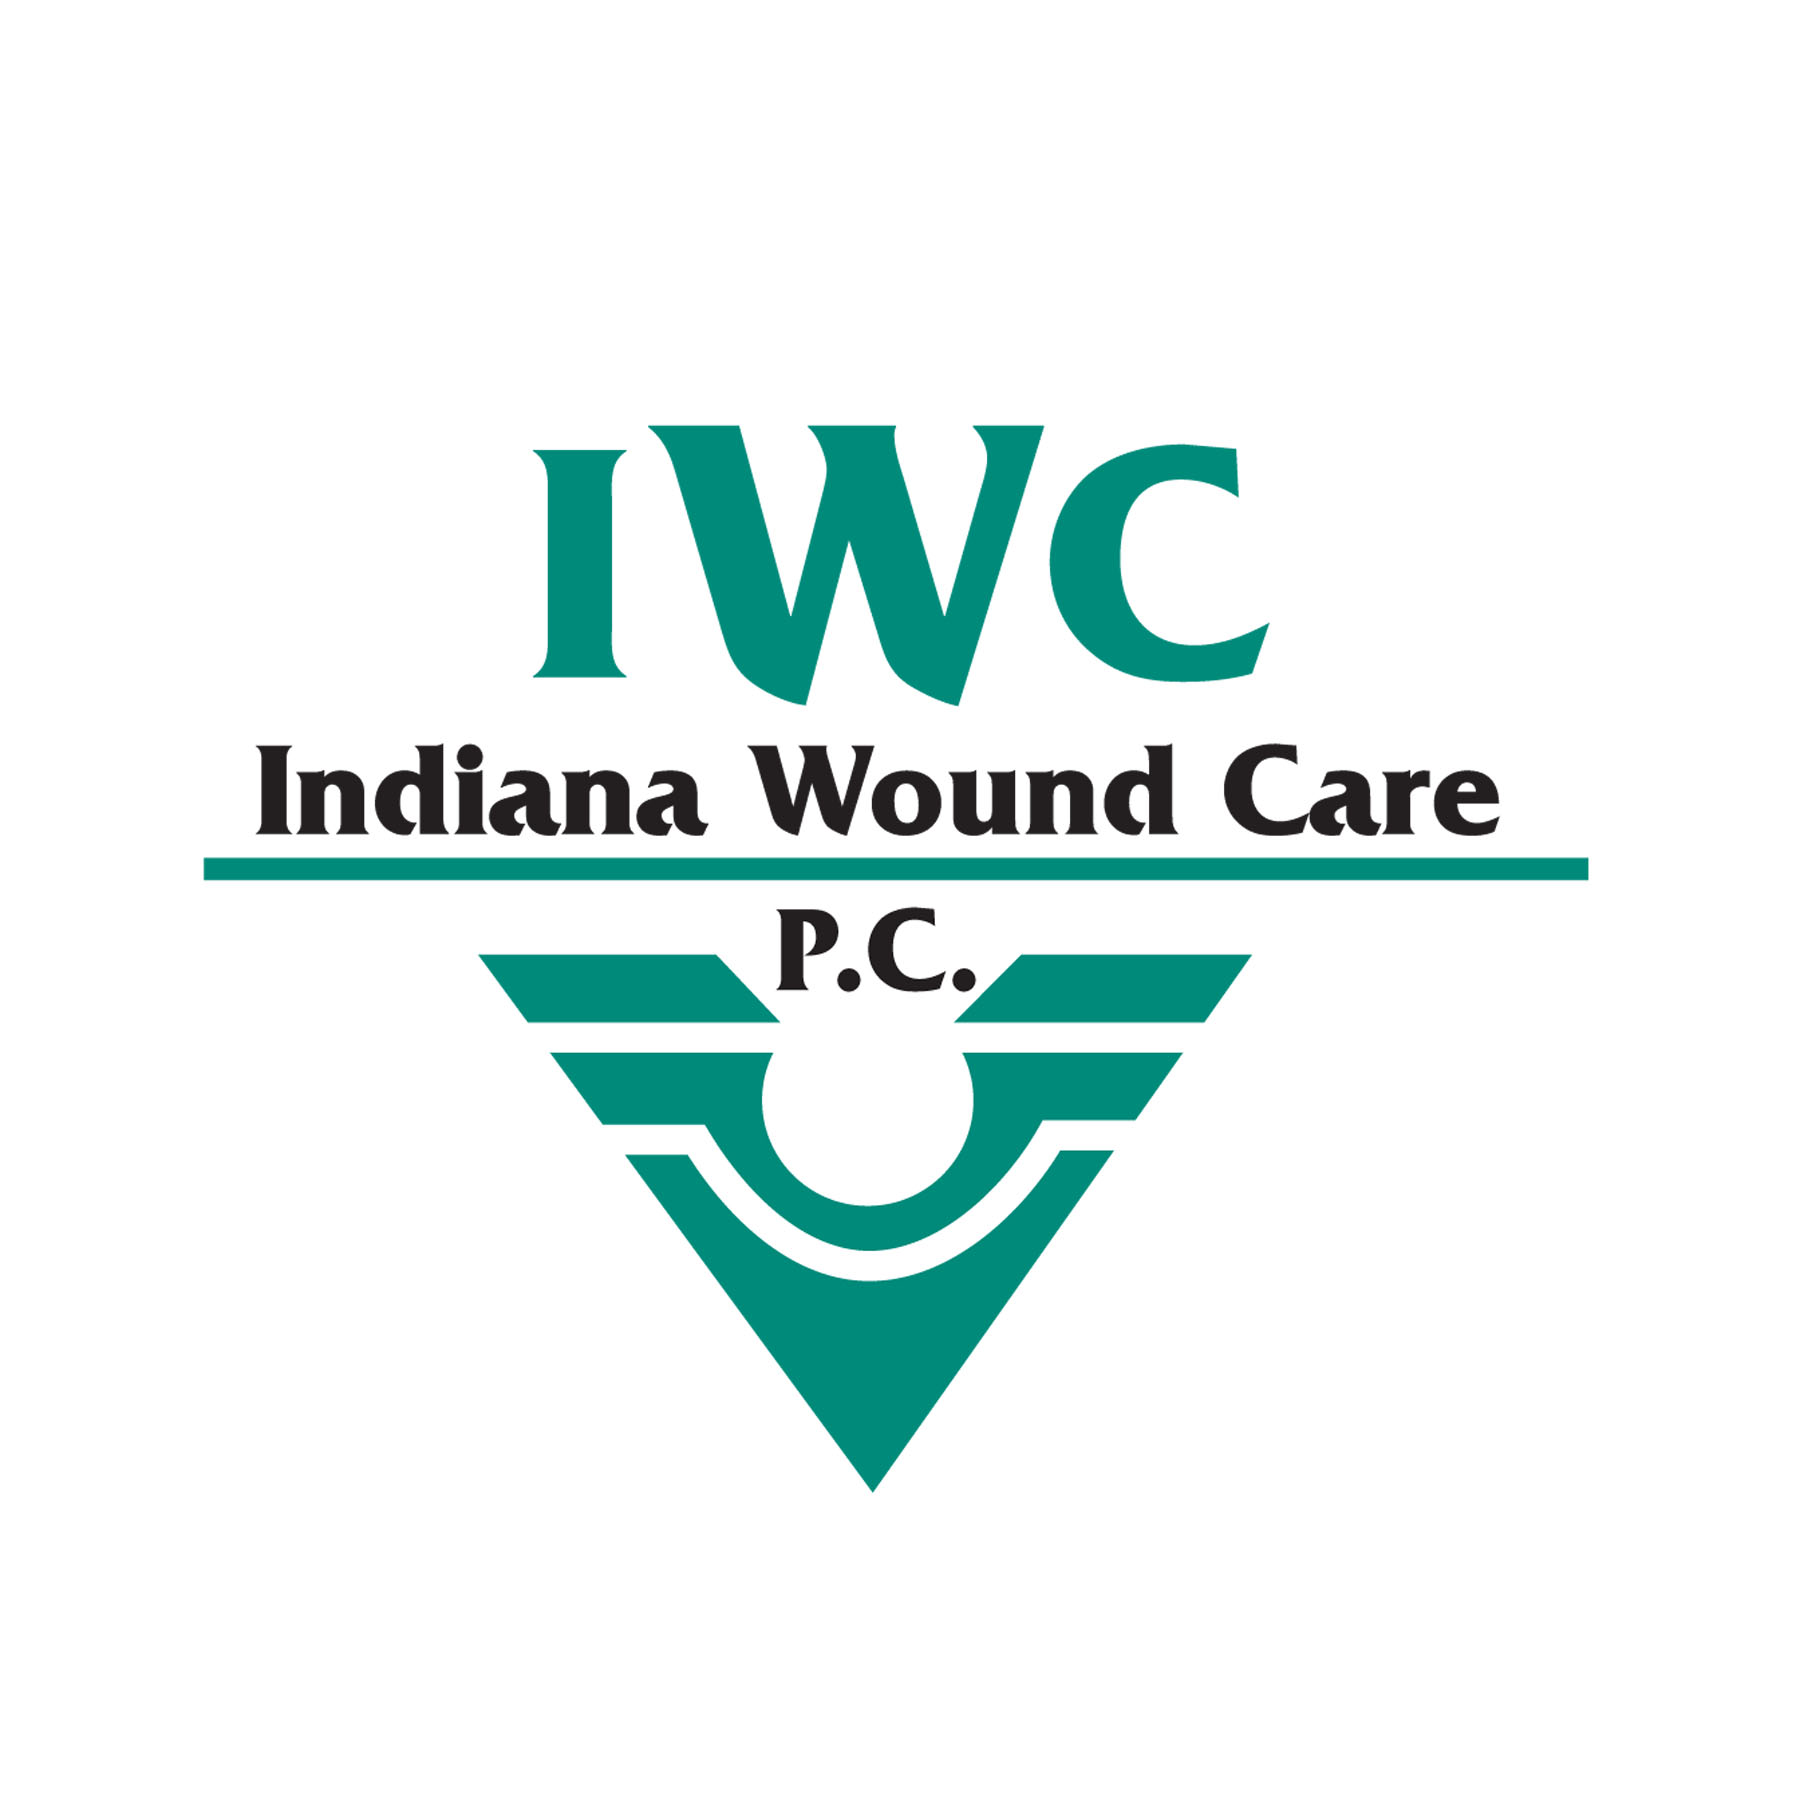 Indiana Wound Care